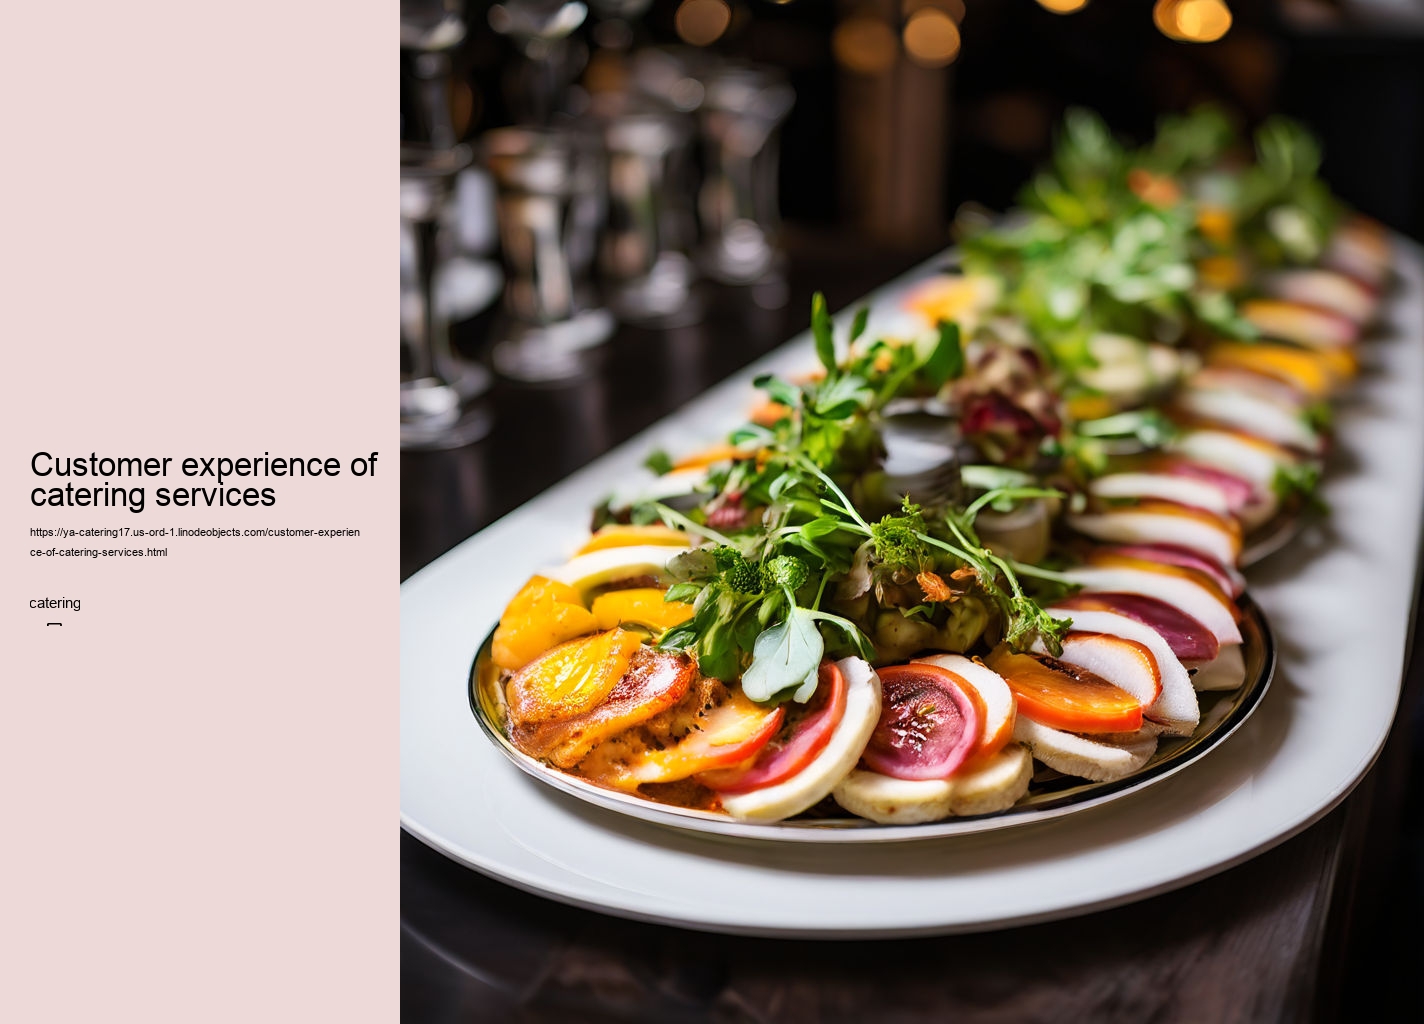 Customer experience of catering services